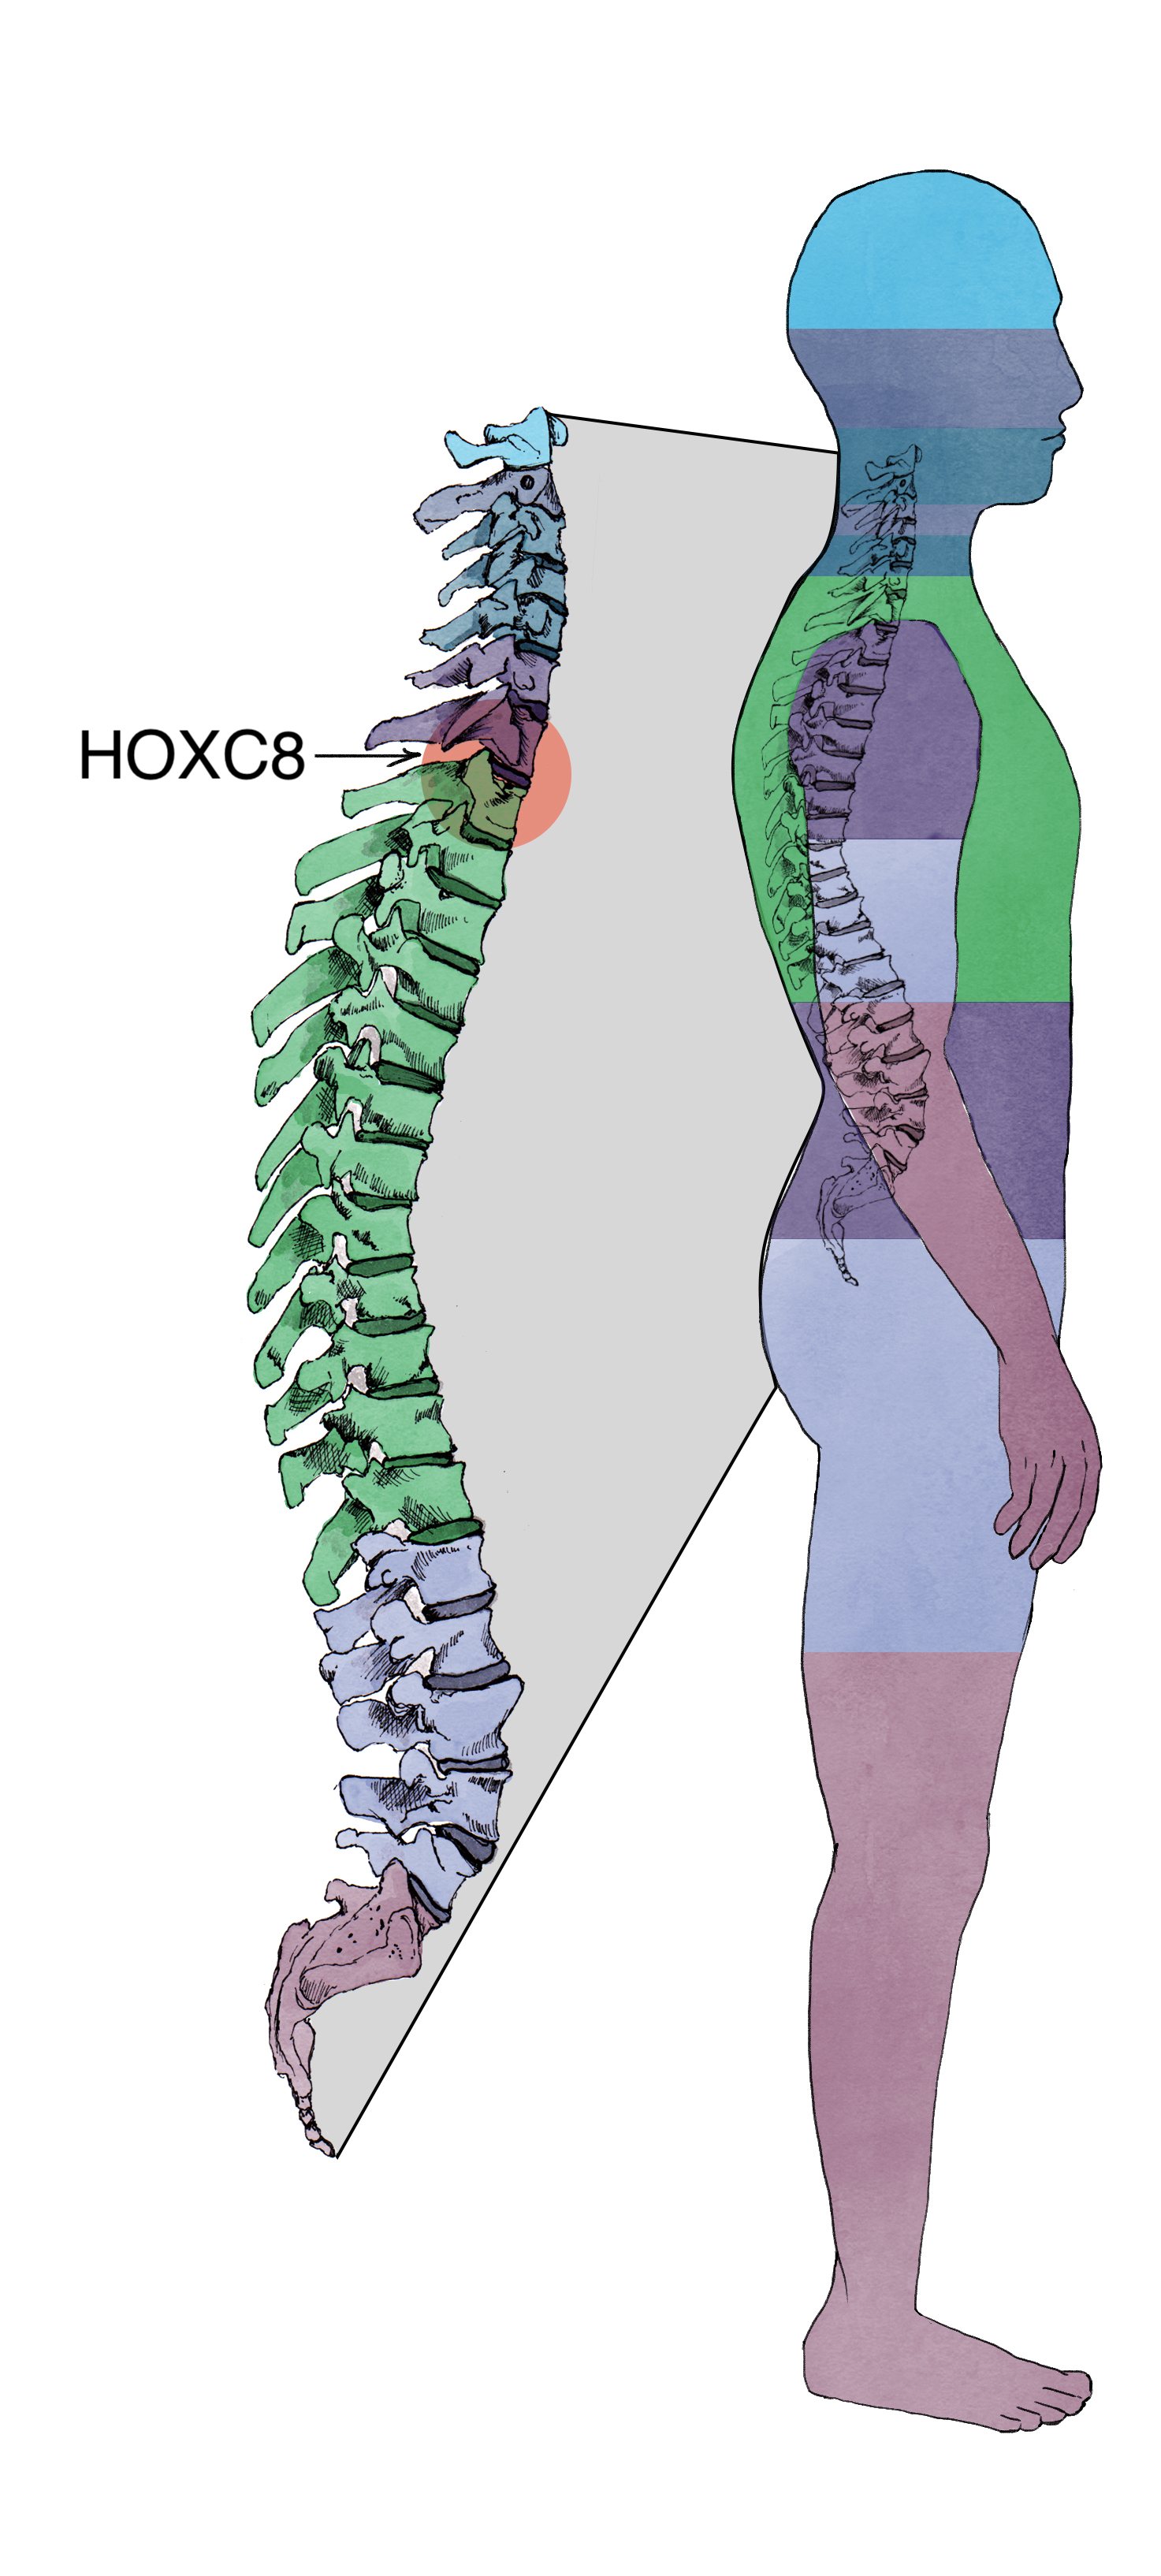 graphic of spinal cord and HOX expression plot